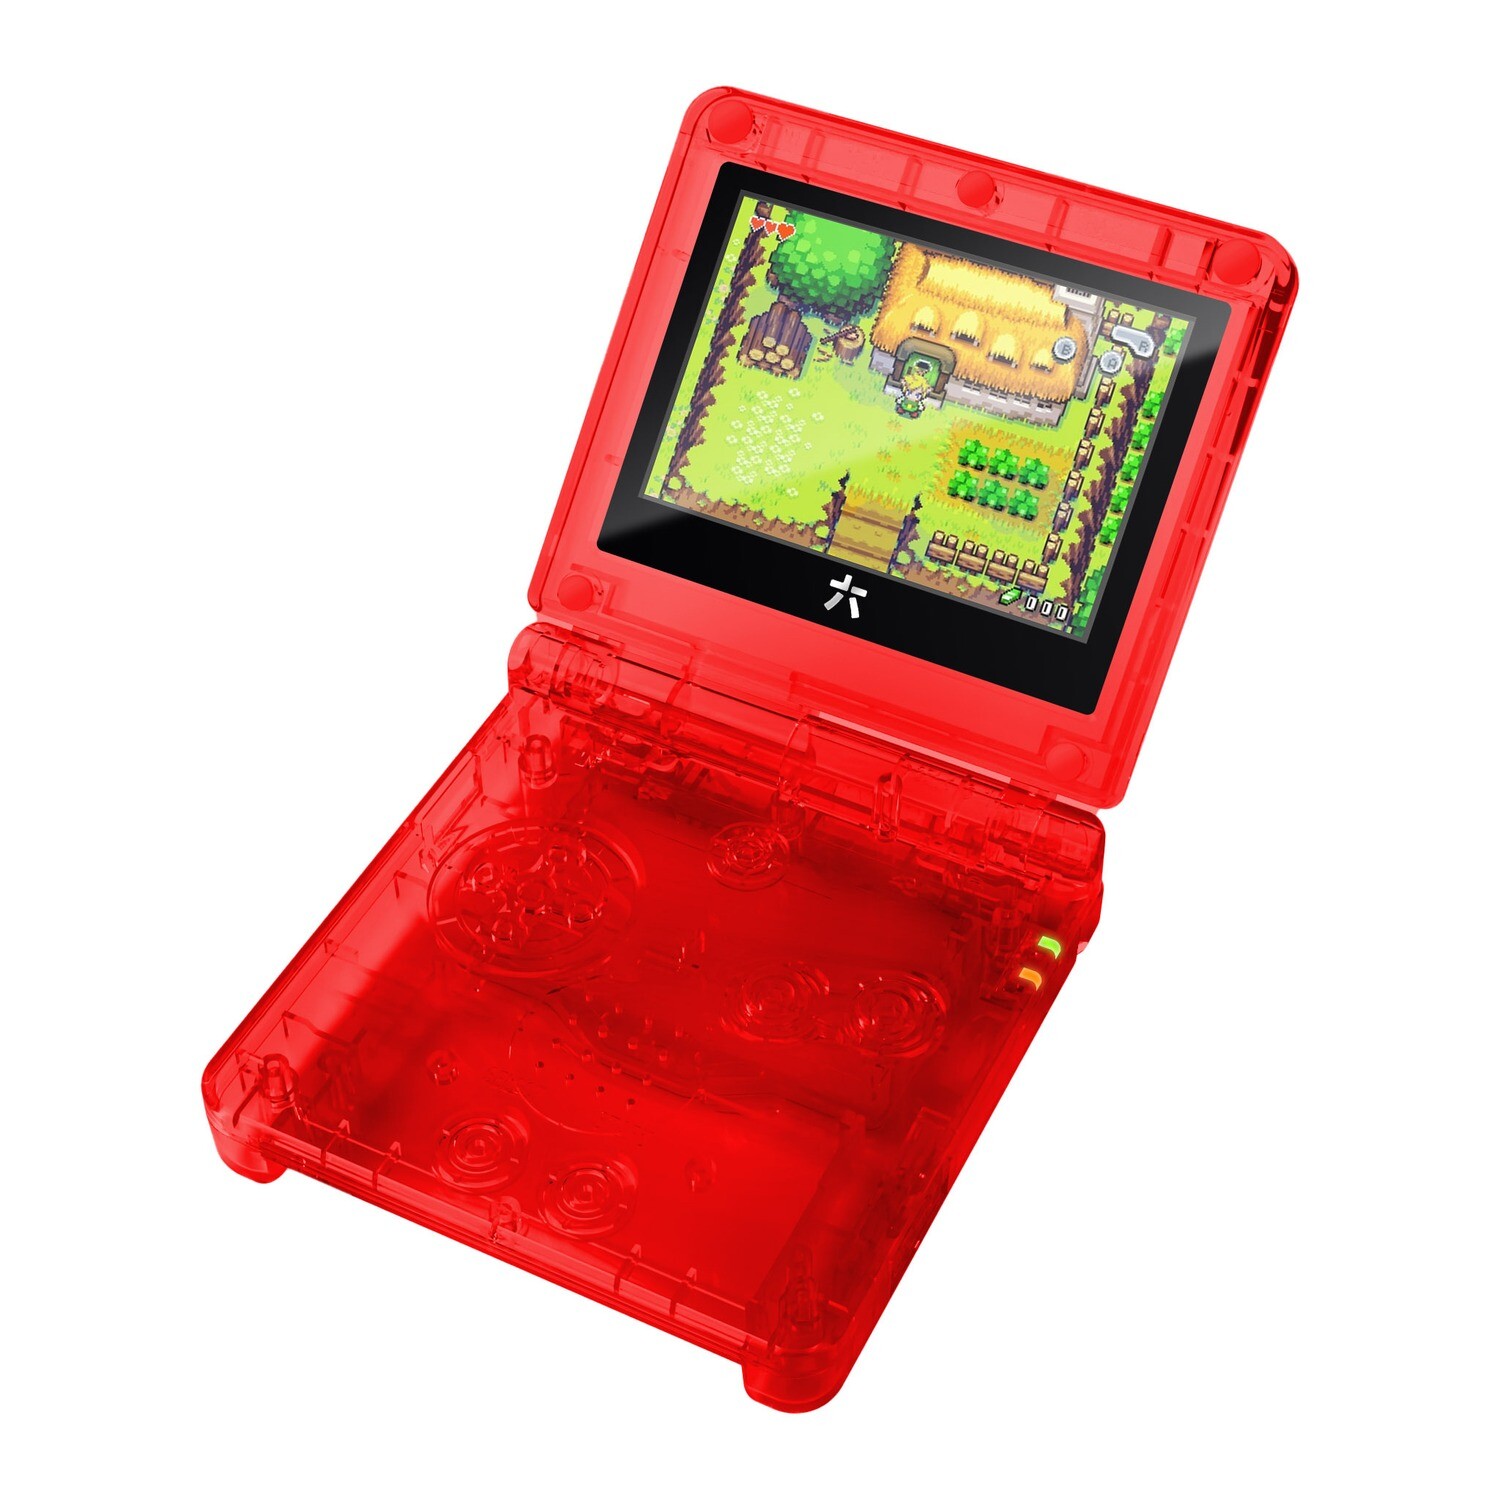 Game Boy Advance SP Console: Prestige Edition (Clear Red)